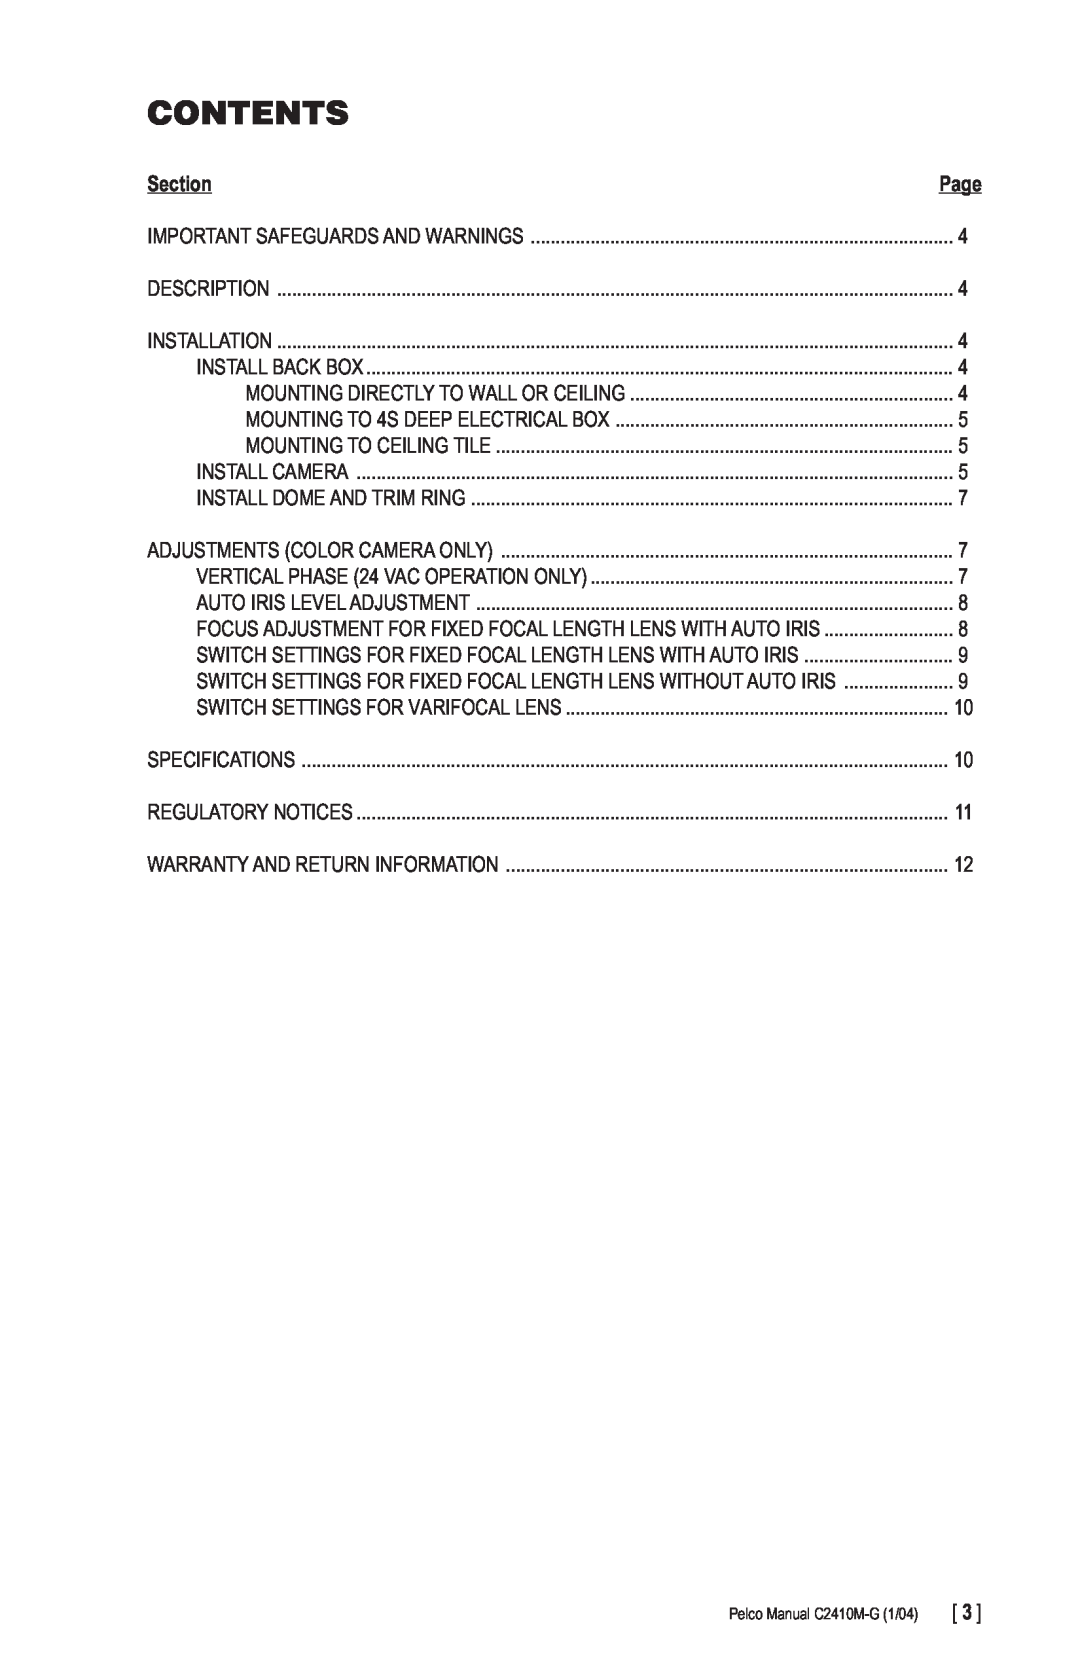 Pelco C2410M-G manual Contents, Section, Page 